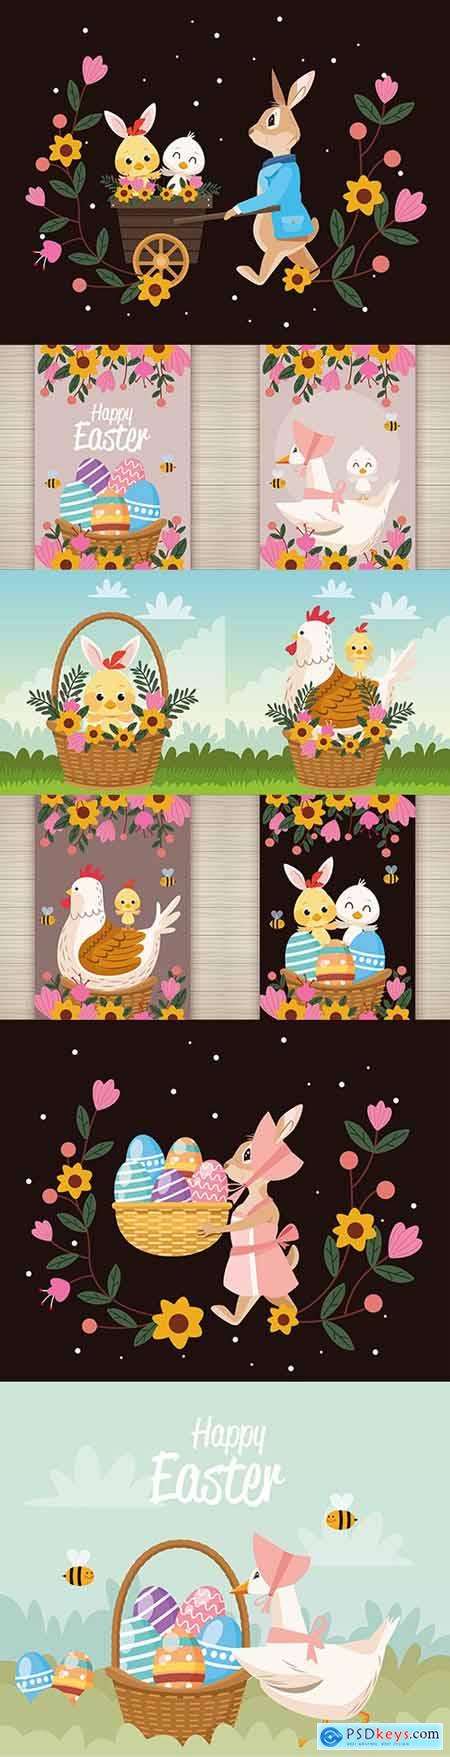 Easter postcard with duck and eggs in basket